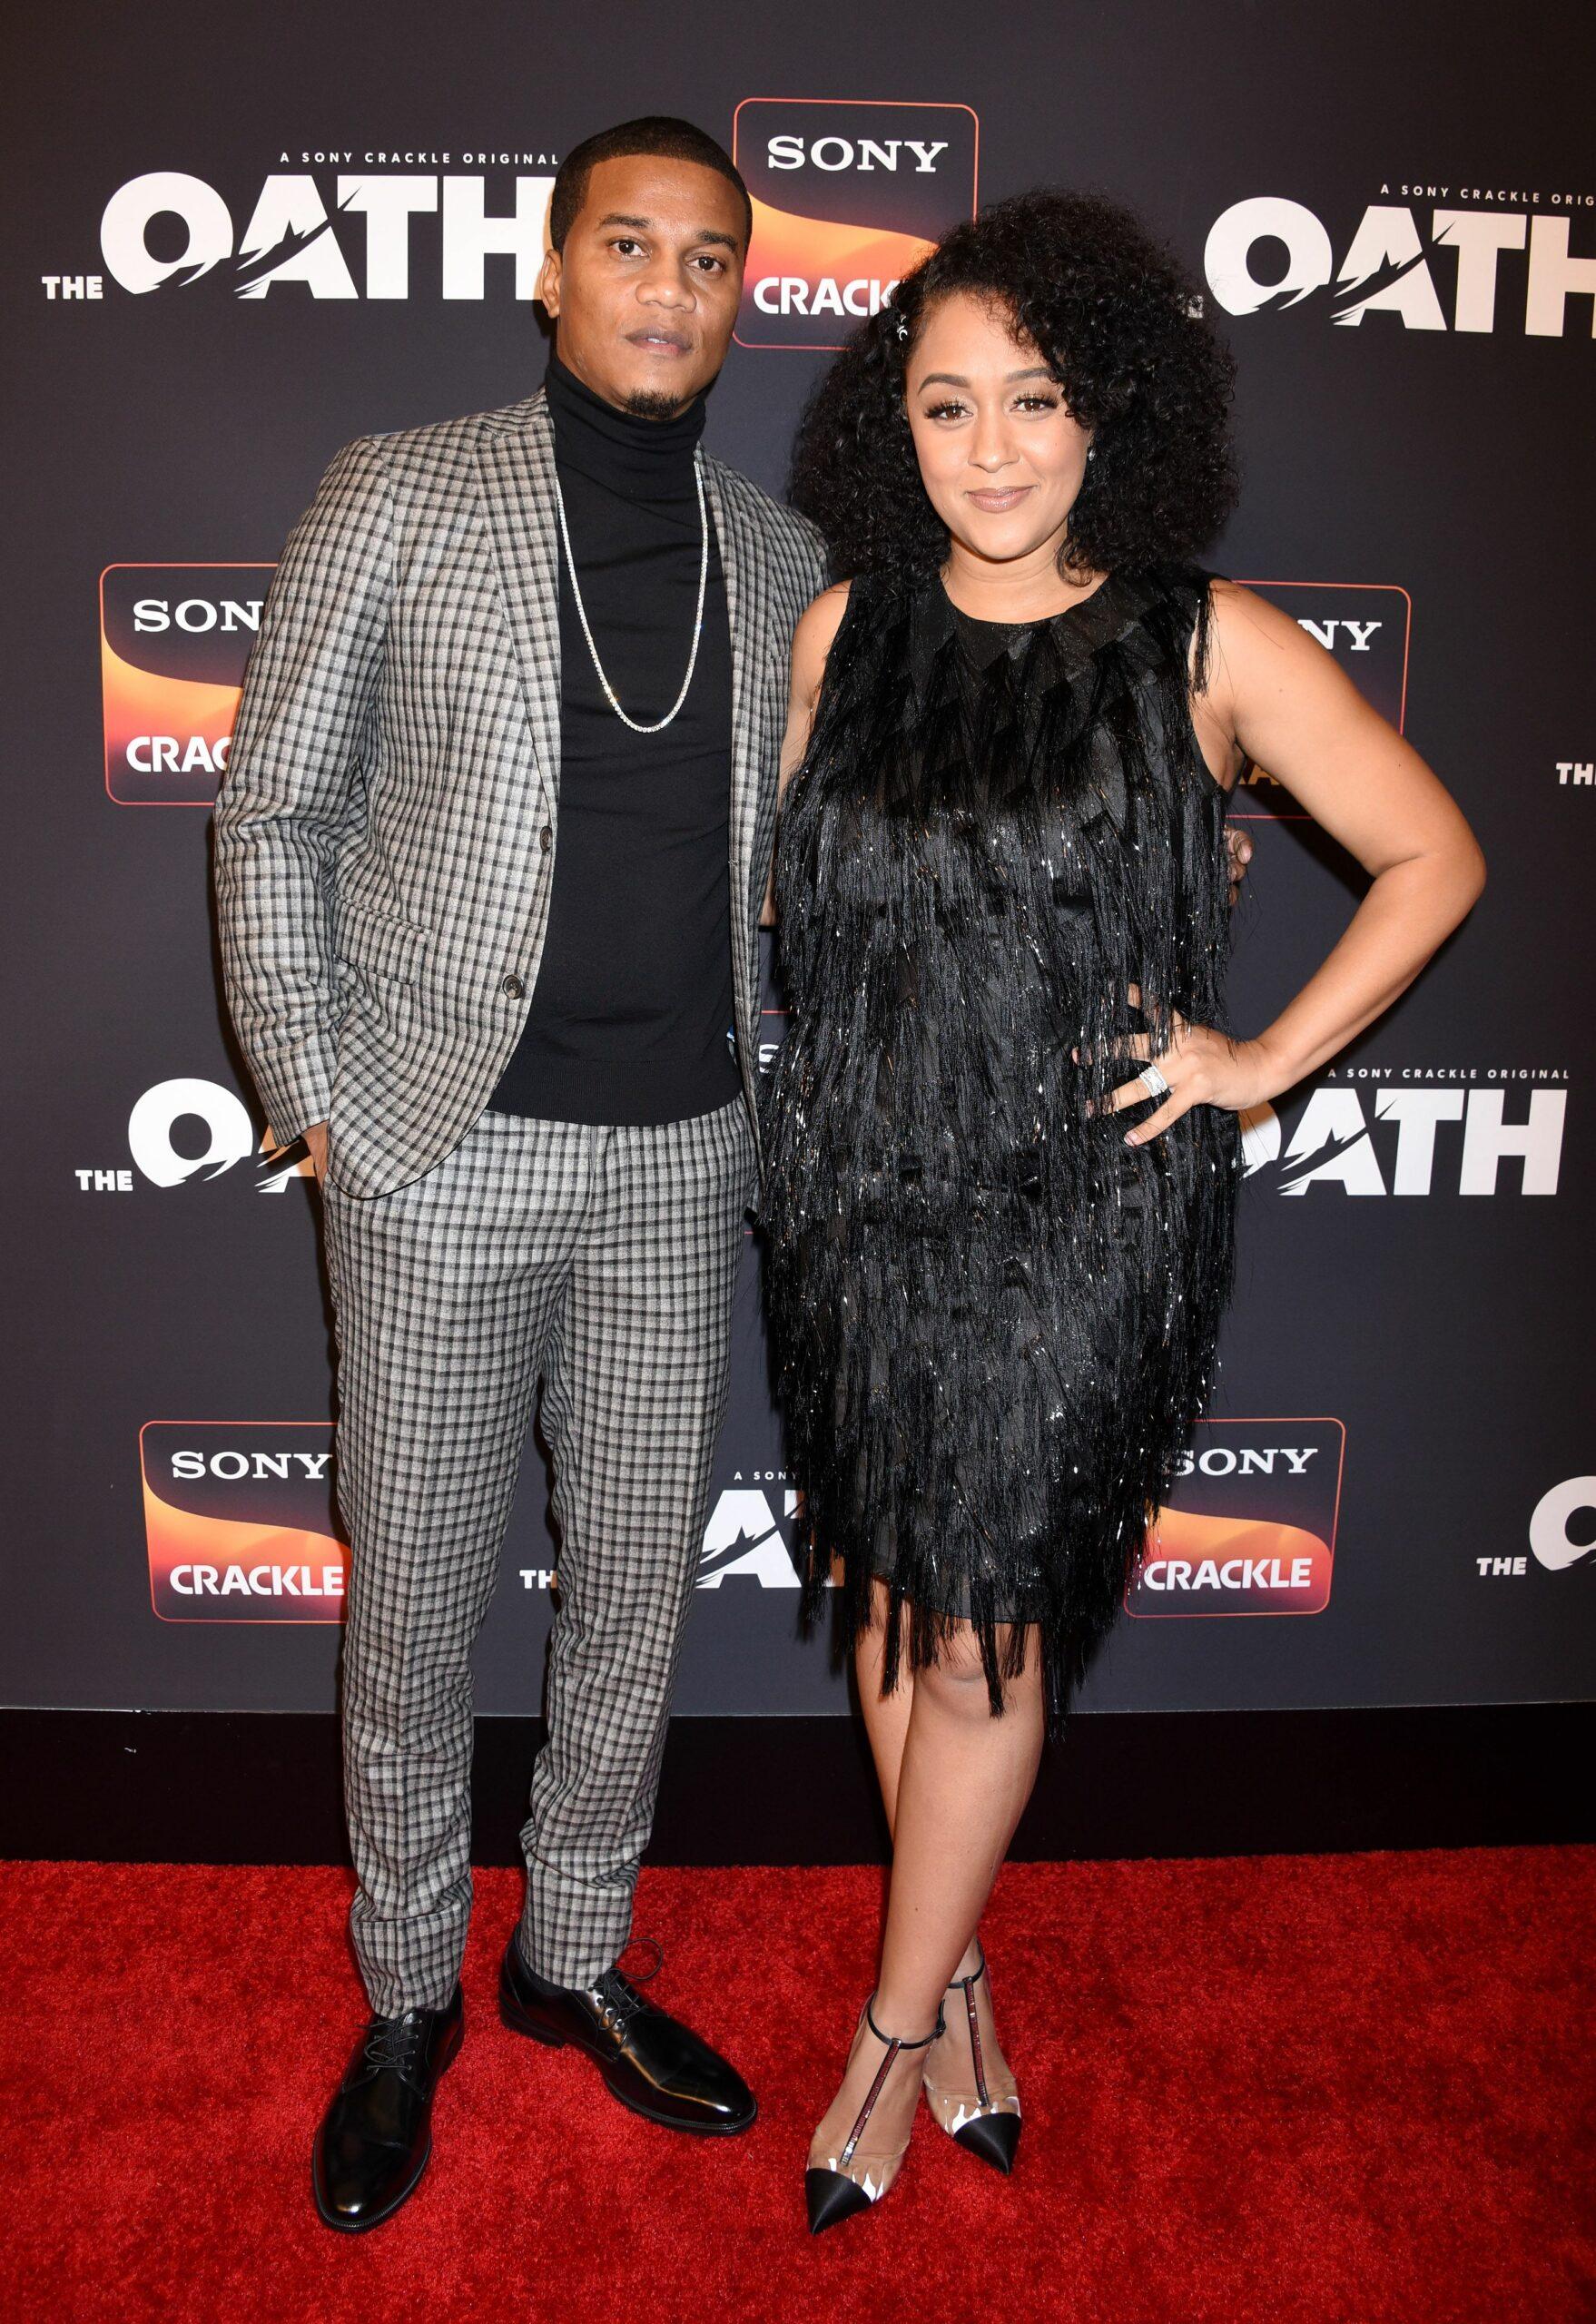 Cory Hardrict and Tia Mowry at Sony Crackle's 'The Oath' Season 2 Screening Event